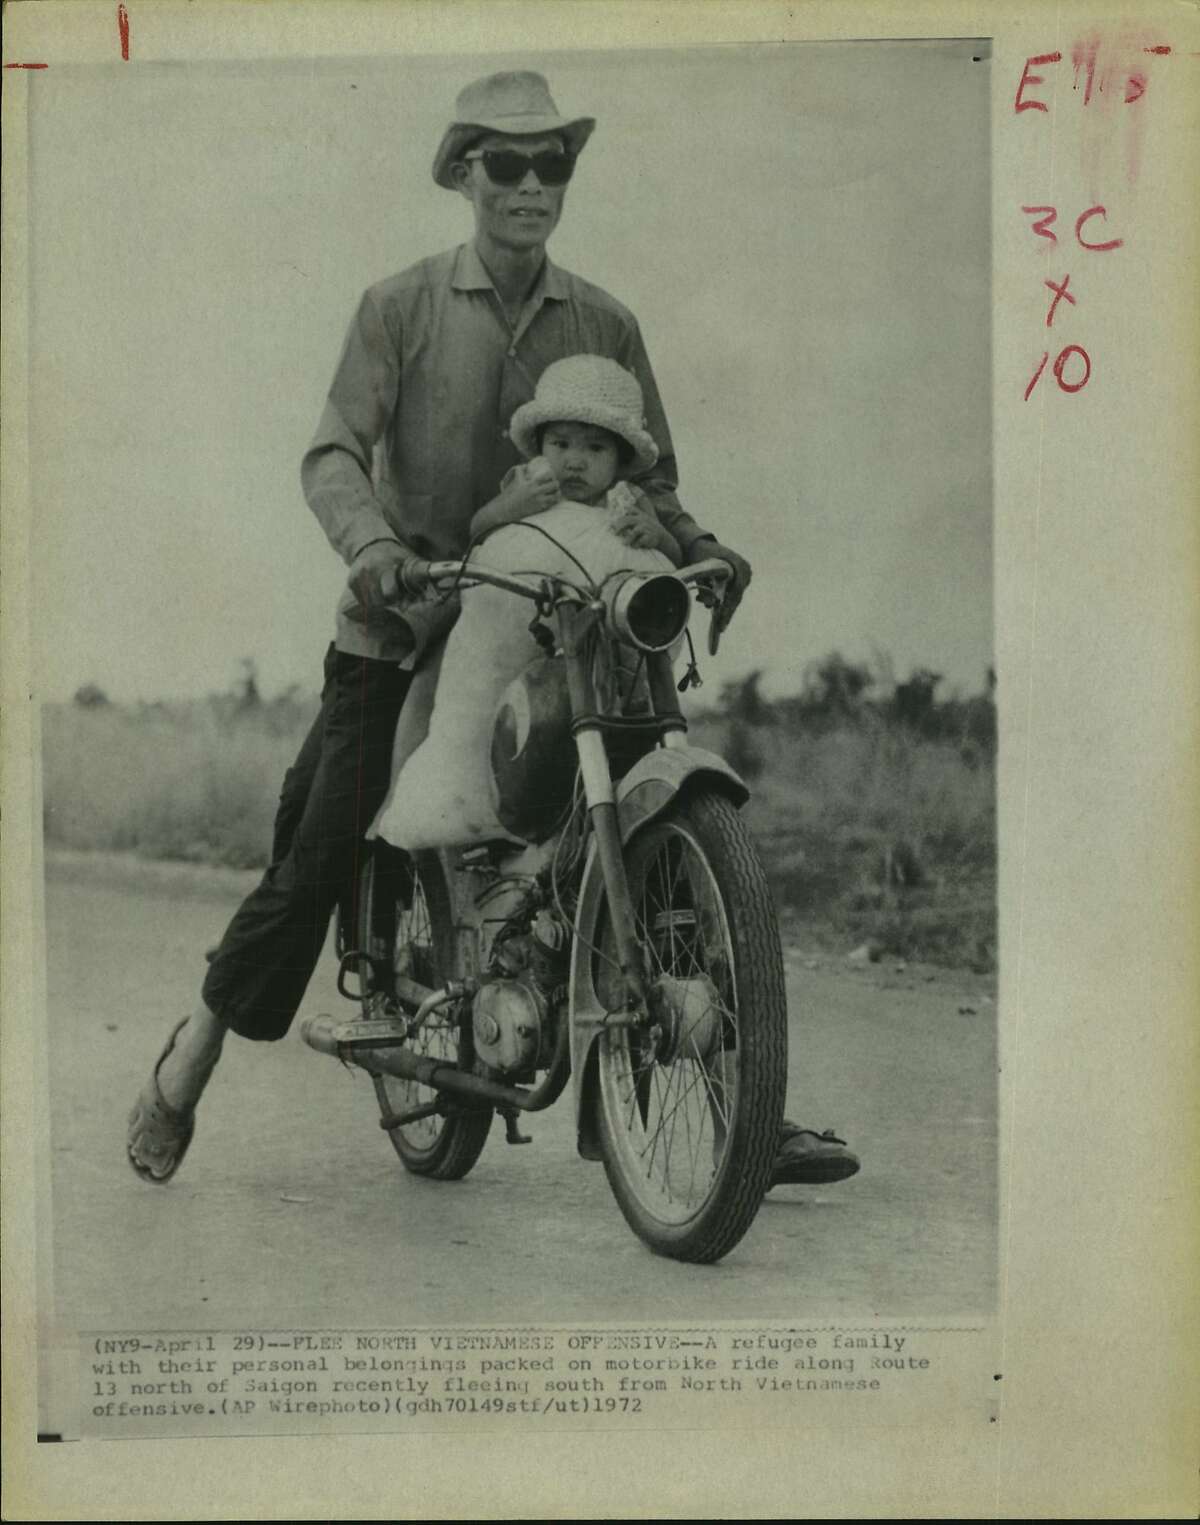 A refugee family with their personal belongings packed on motorbike ride along Route 13 north of Saigon recently fleeing south from North Vietnamese offensive. Meager belongings were carried in a sack. South Vietnamese Refugees